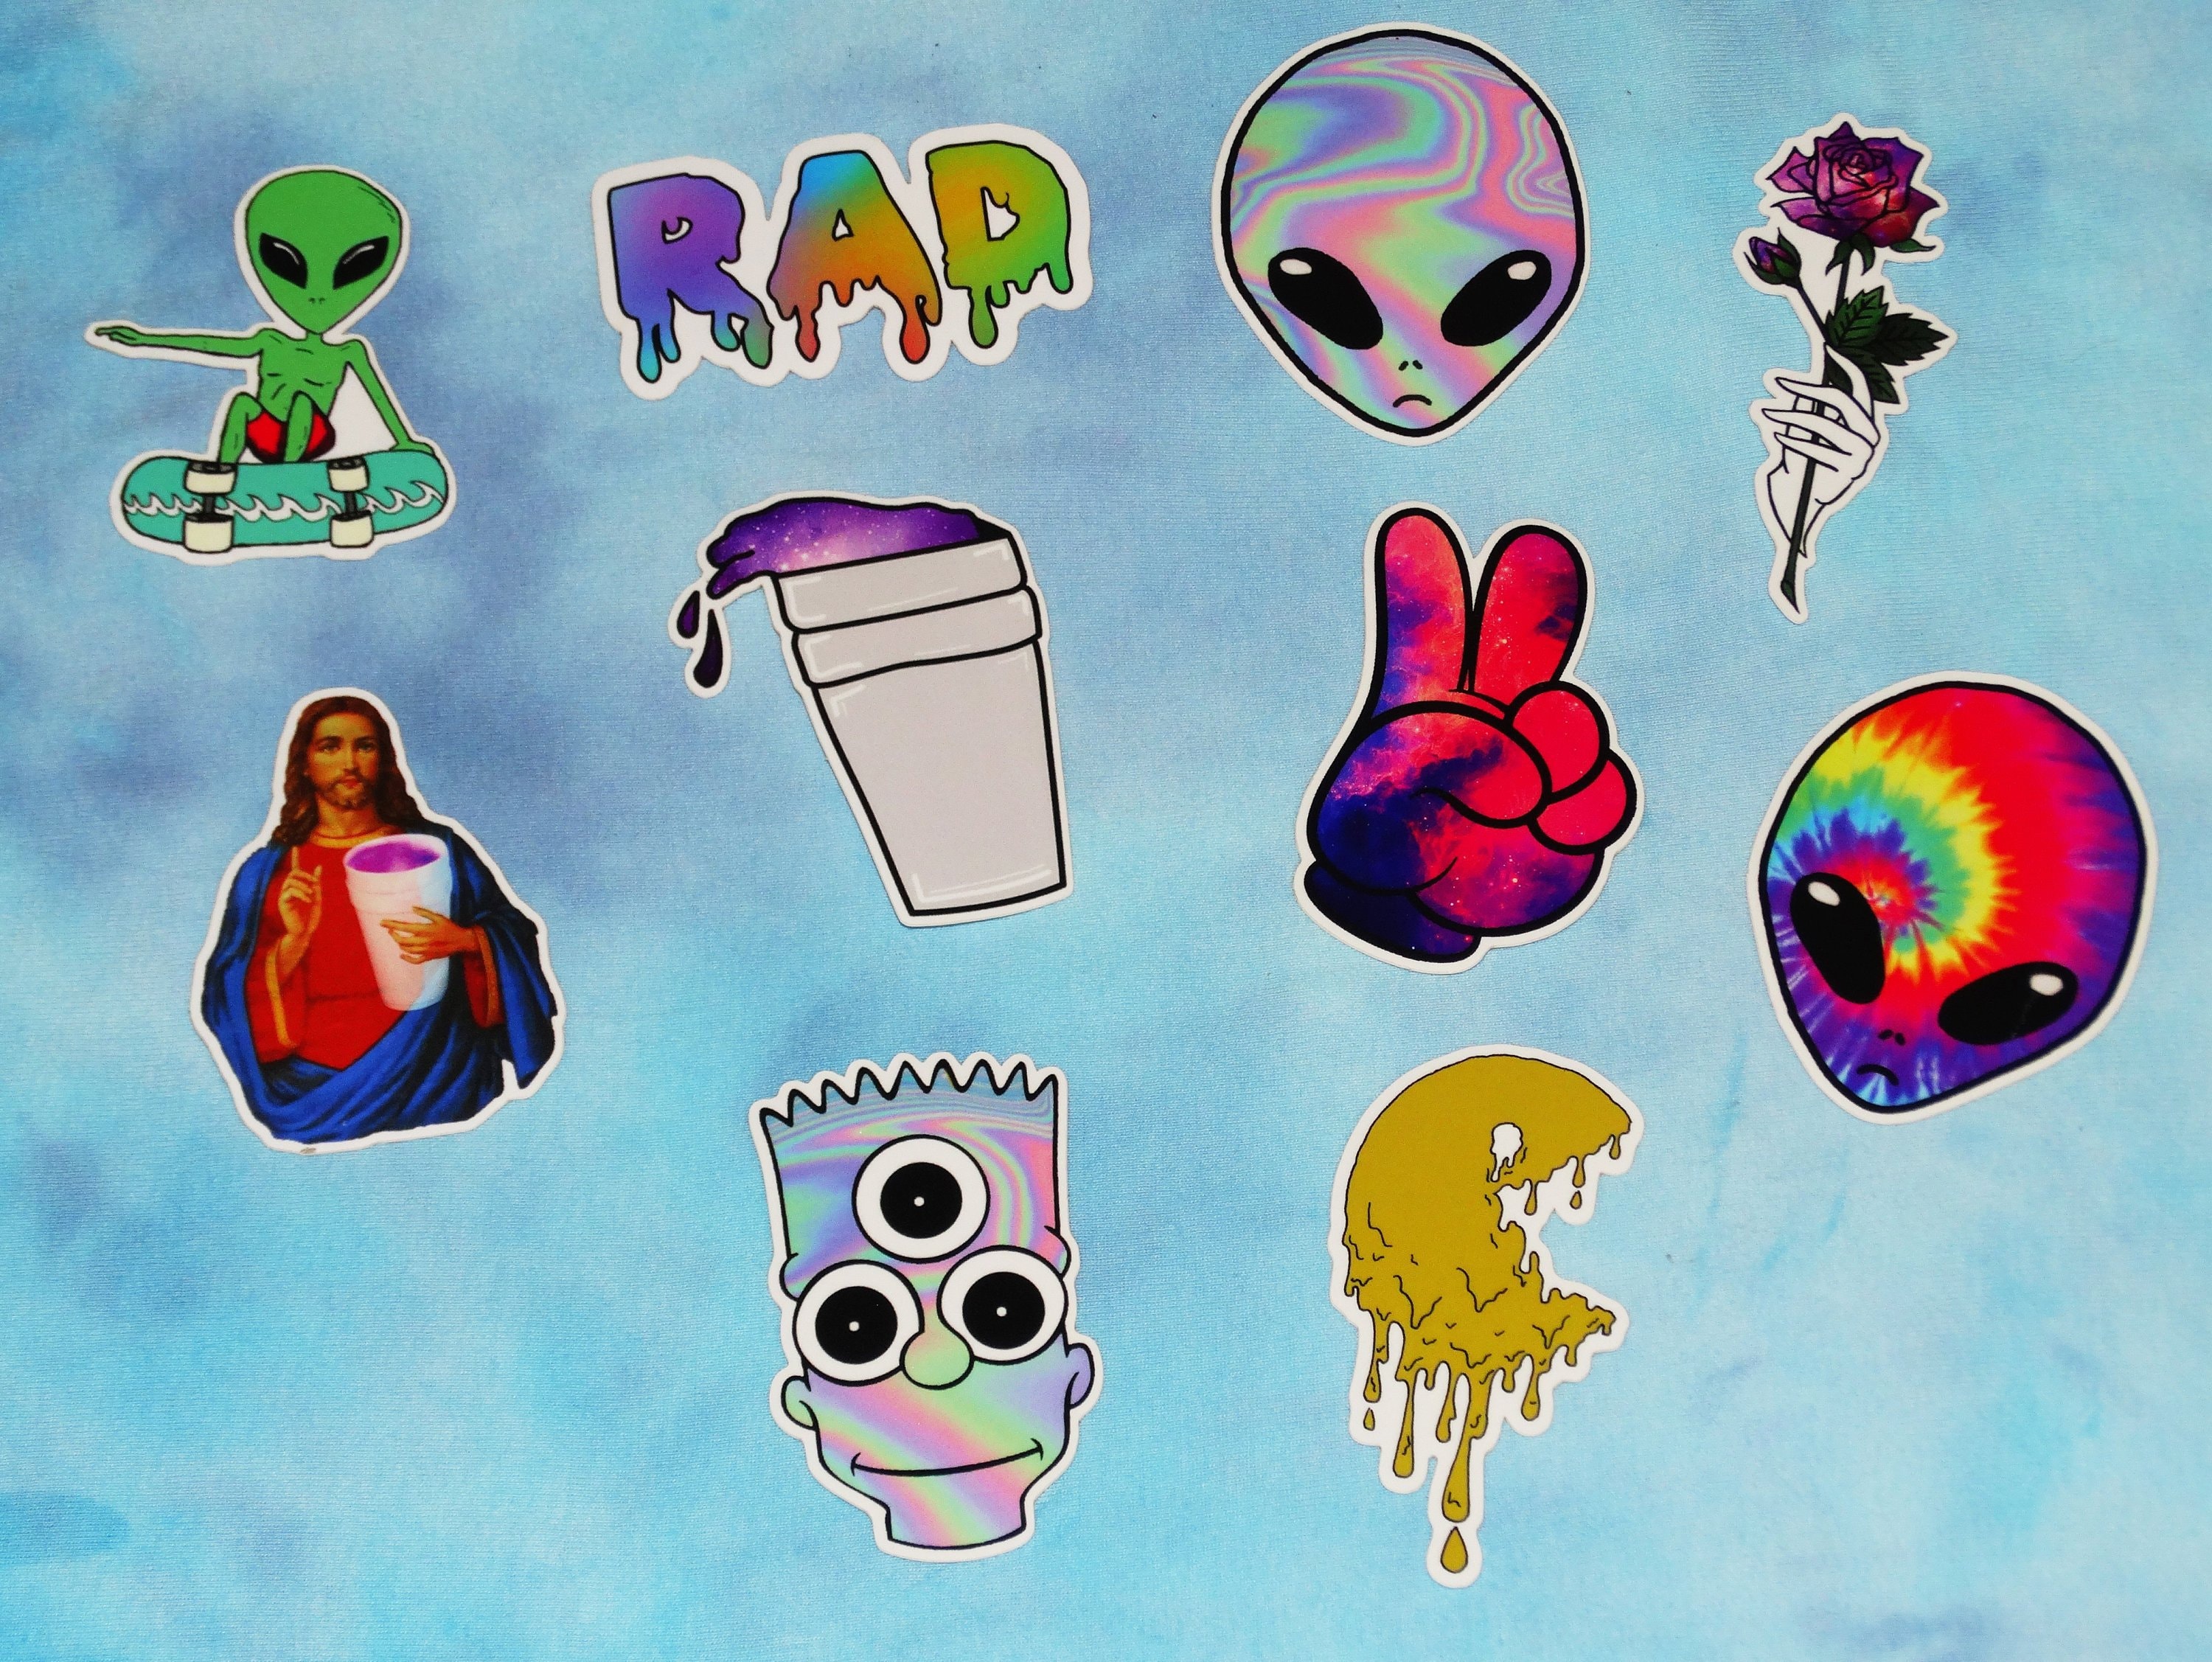  Trippy  Stickers  Tumblr Stickers  Aesthetic  Galaxy Stickers  